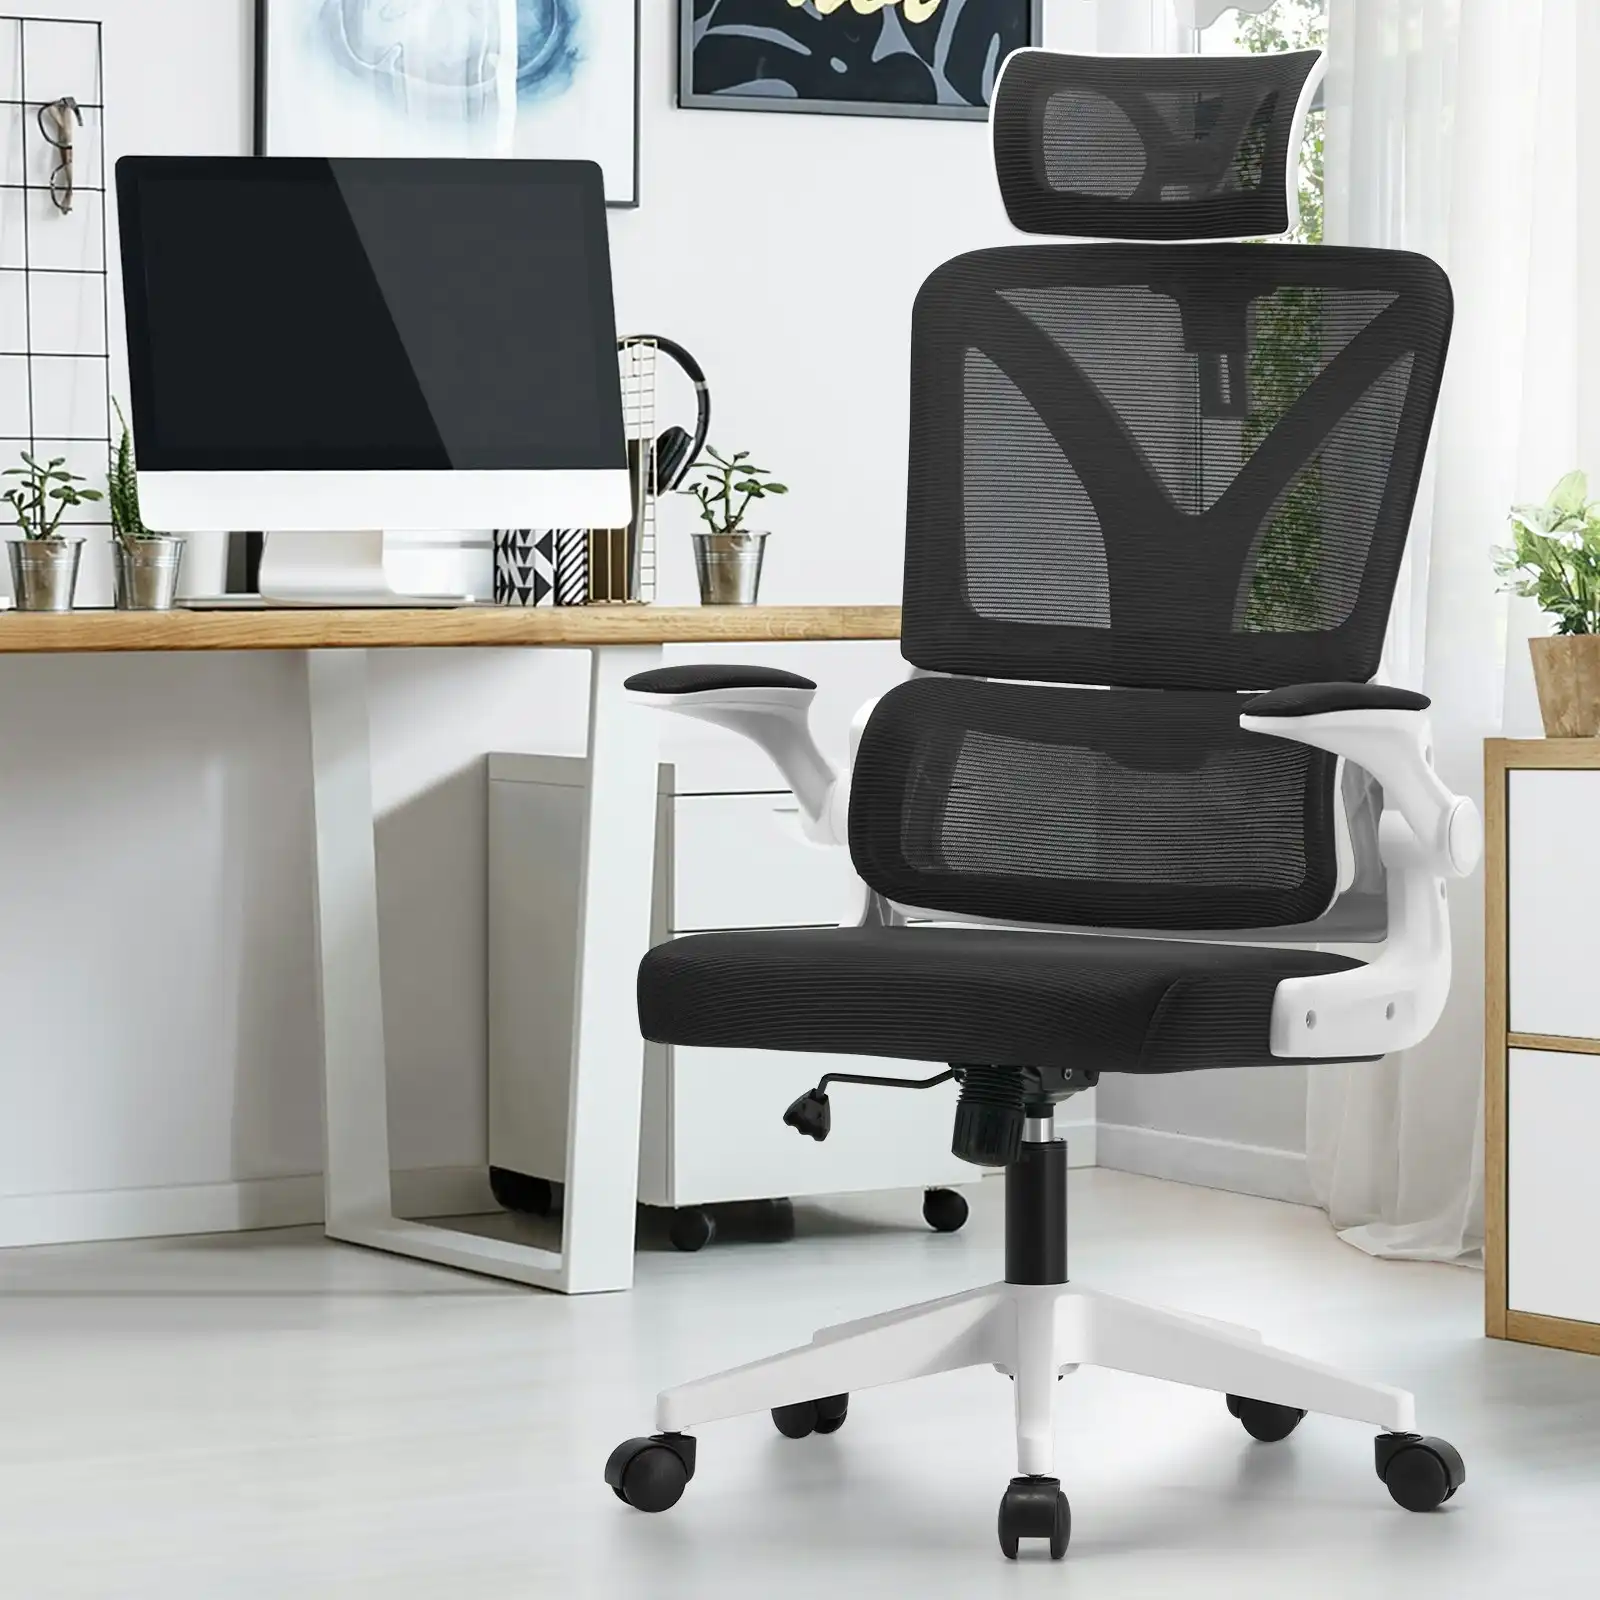 Oikiture Mesh Office Chair Adjustable Lumbar Support Reclining D-Shape White&Black